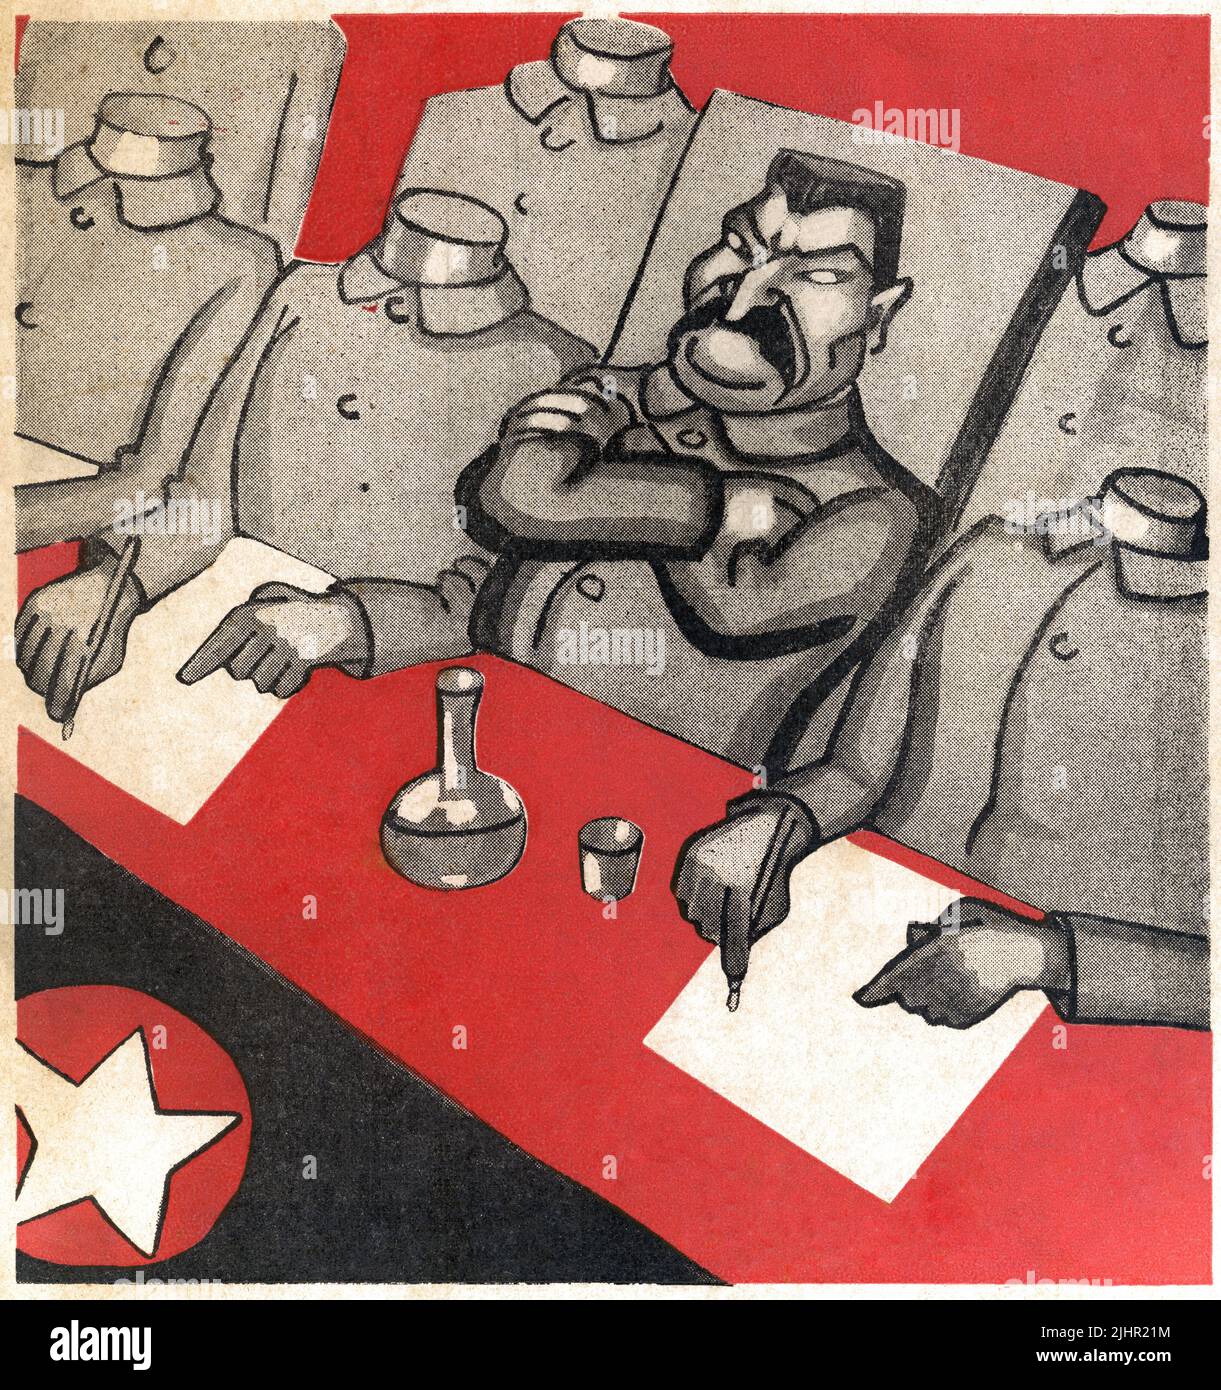 Stalin and his companions. Detail of the satirical cartoon published in the newspaper 'Aux Ecoutes', on March 12, 1938. U.S.S.R. Private Collection Stock Photo